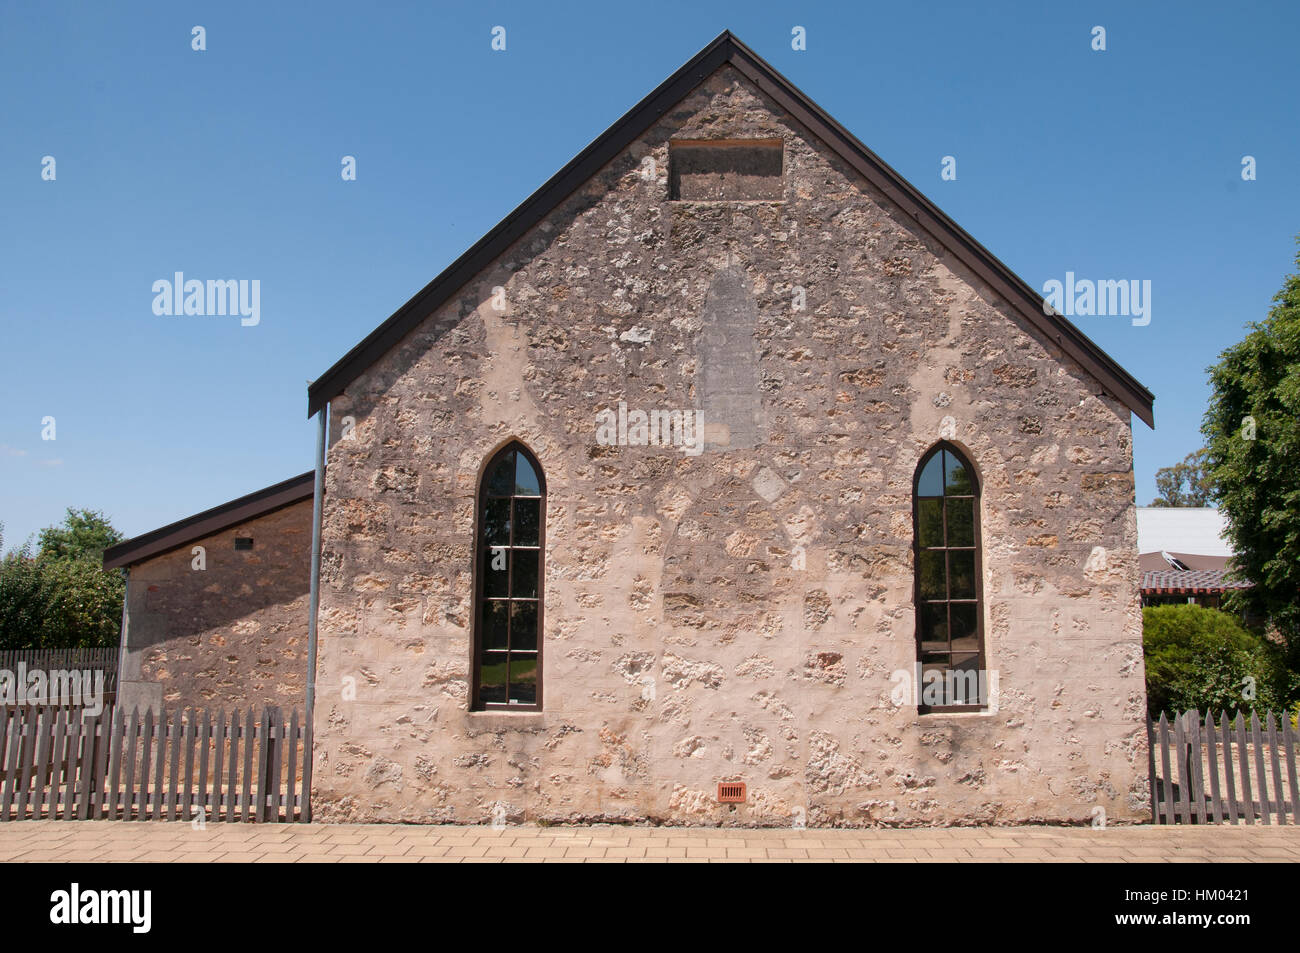 Mary MacKillop Schoolhouse at Penola, southeast South Australia. Now canonised, Mother Mary MacKillop has become the first Australian saint. Stock Photo